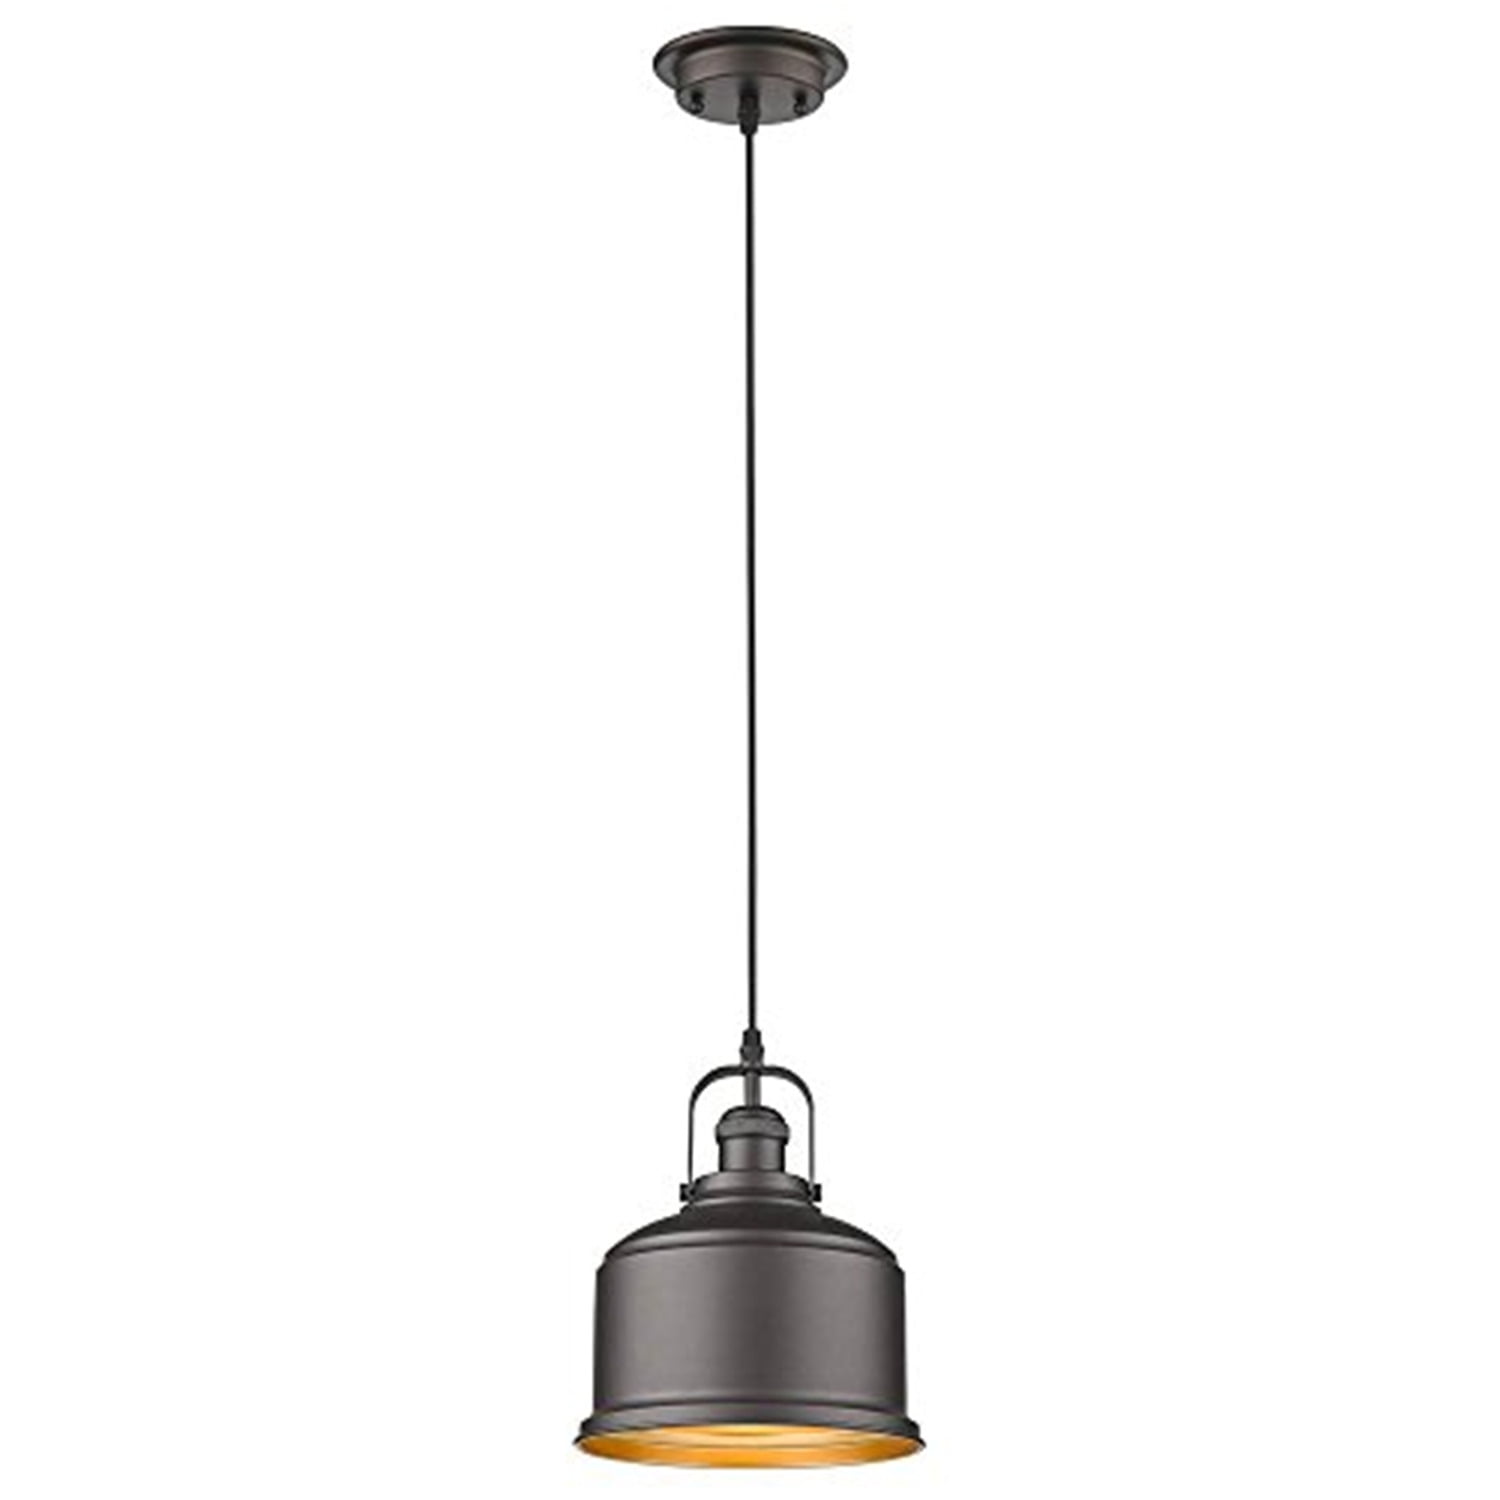 Ch2d087rb08-dp1 Ironclad Industrial-style 1 Light Rubbed Bronze Ceiling Mini Pendant - 8 In.